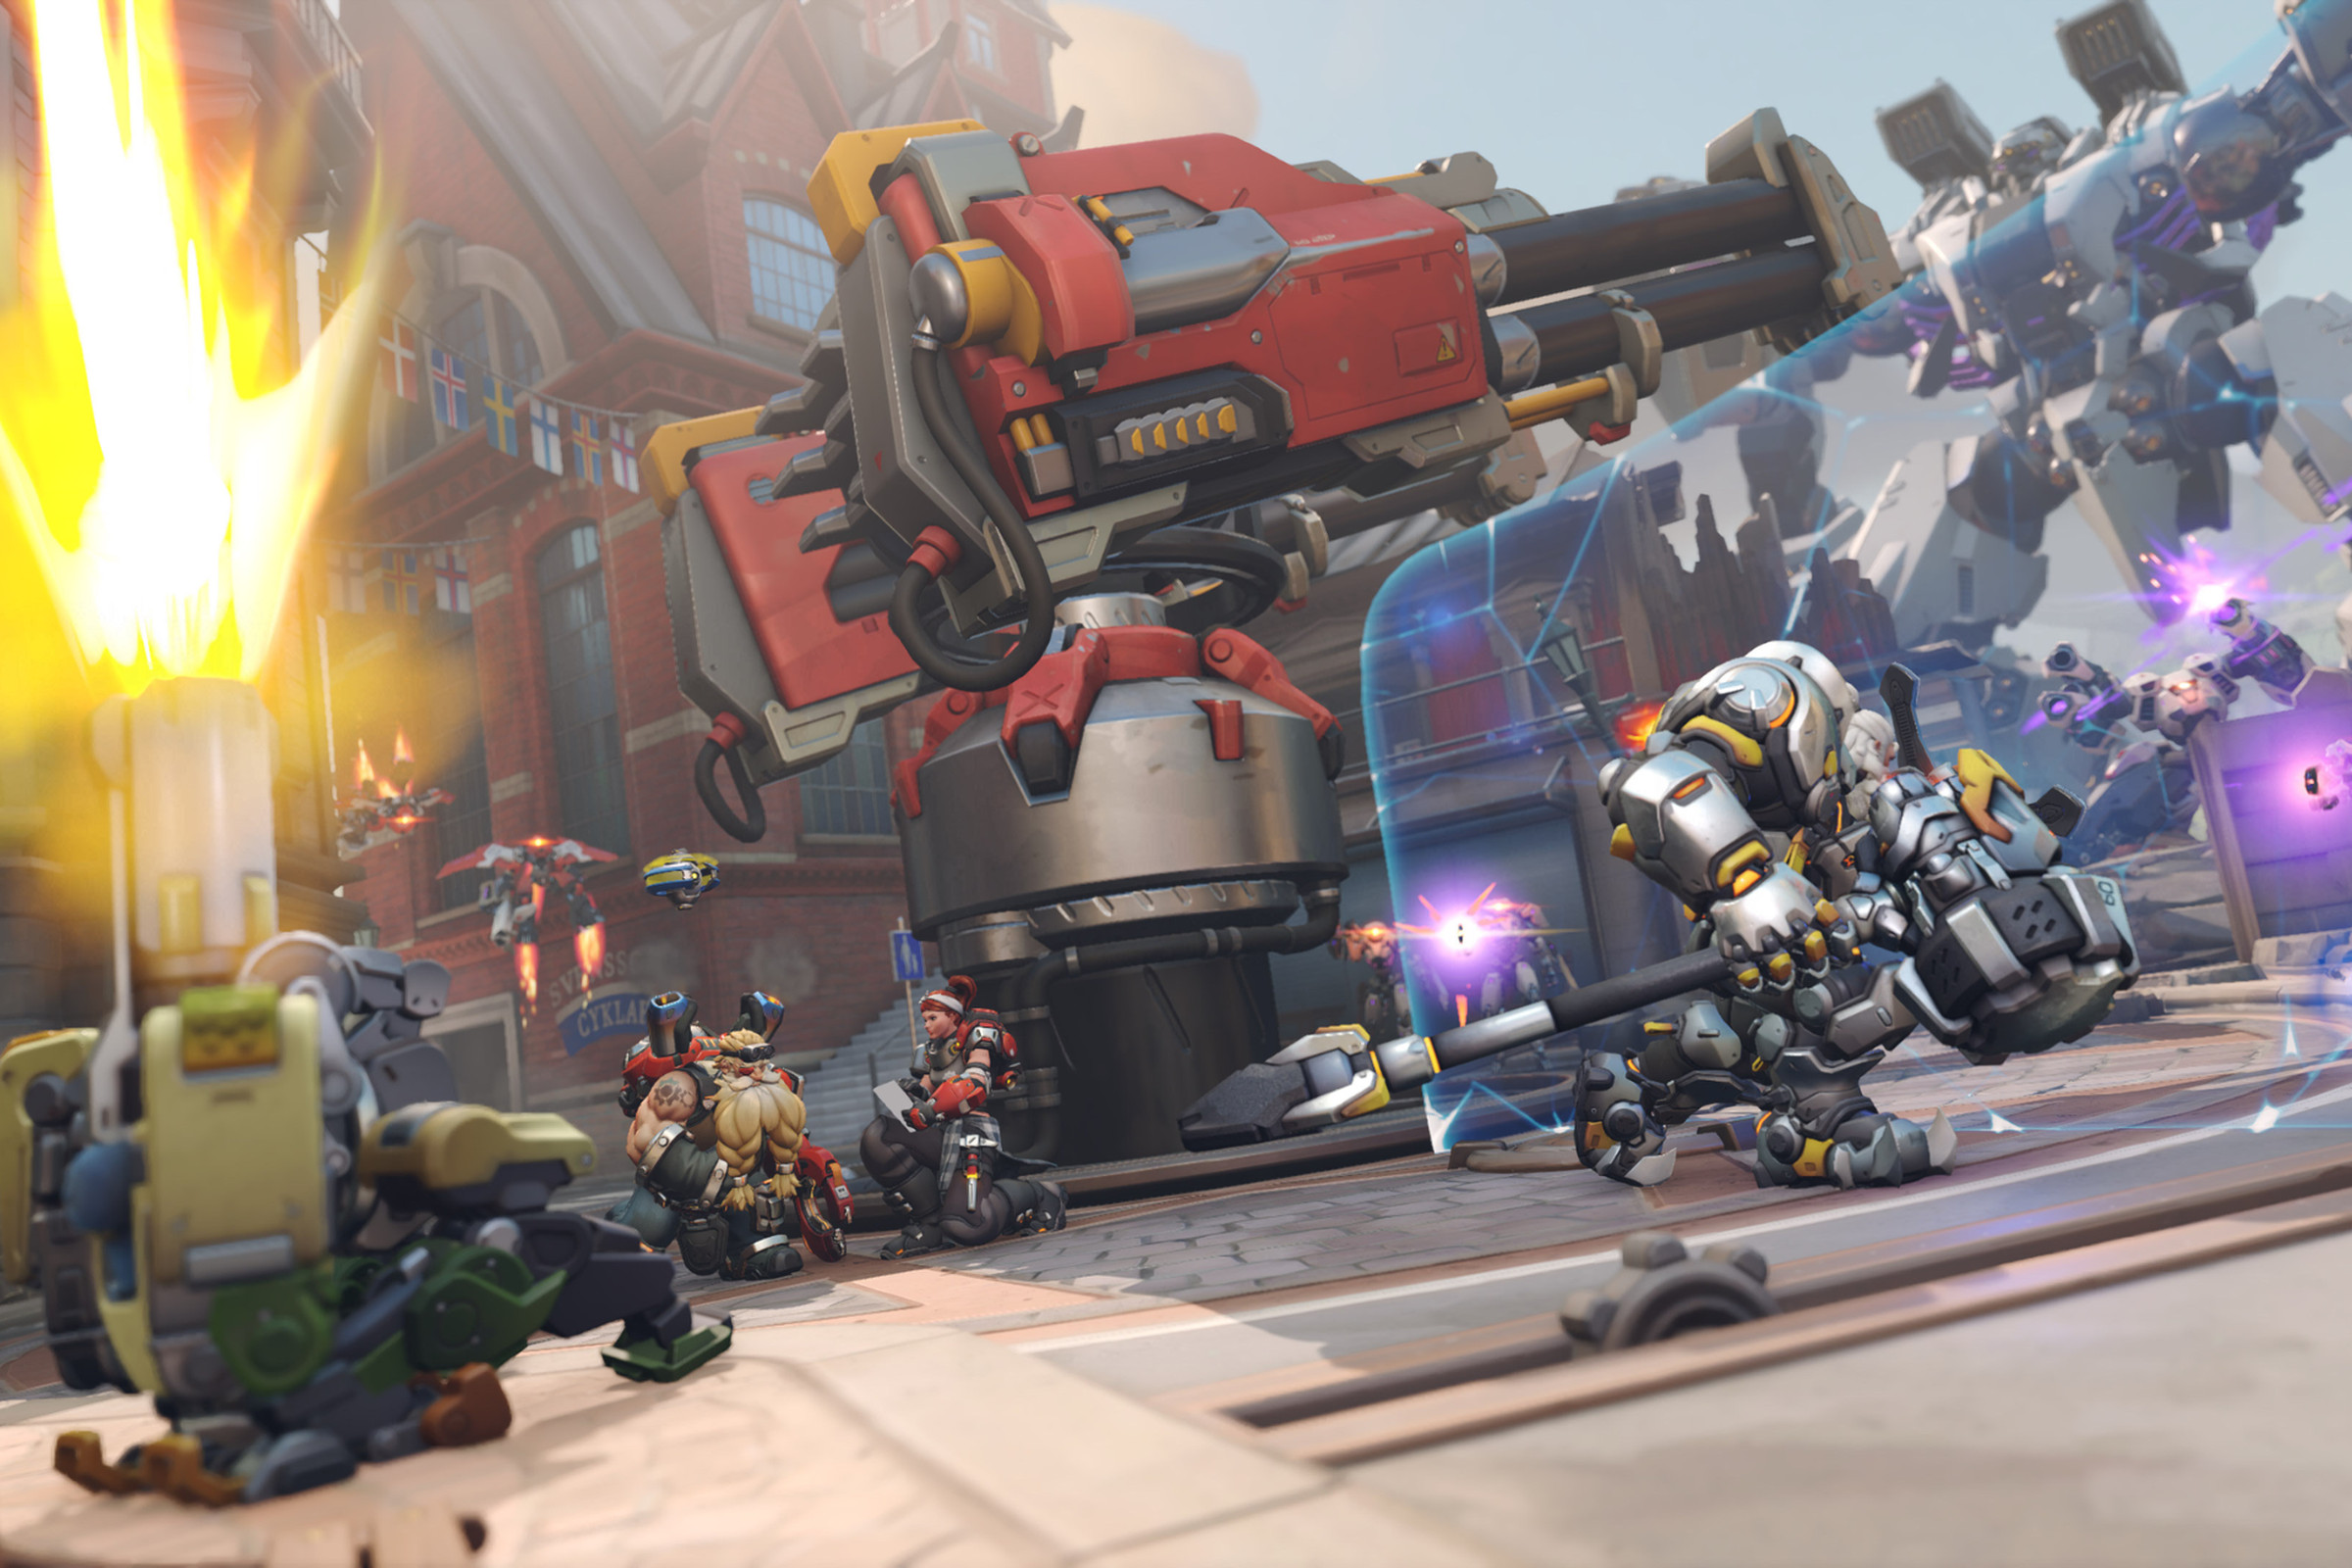 Screenshot from Overwatch 2 featuring the Gothenburg story mission including the heroes Reinhardt, Bastion, Torbjorn and Brigitte defending a huge cannon from an even bigger mech enemy